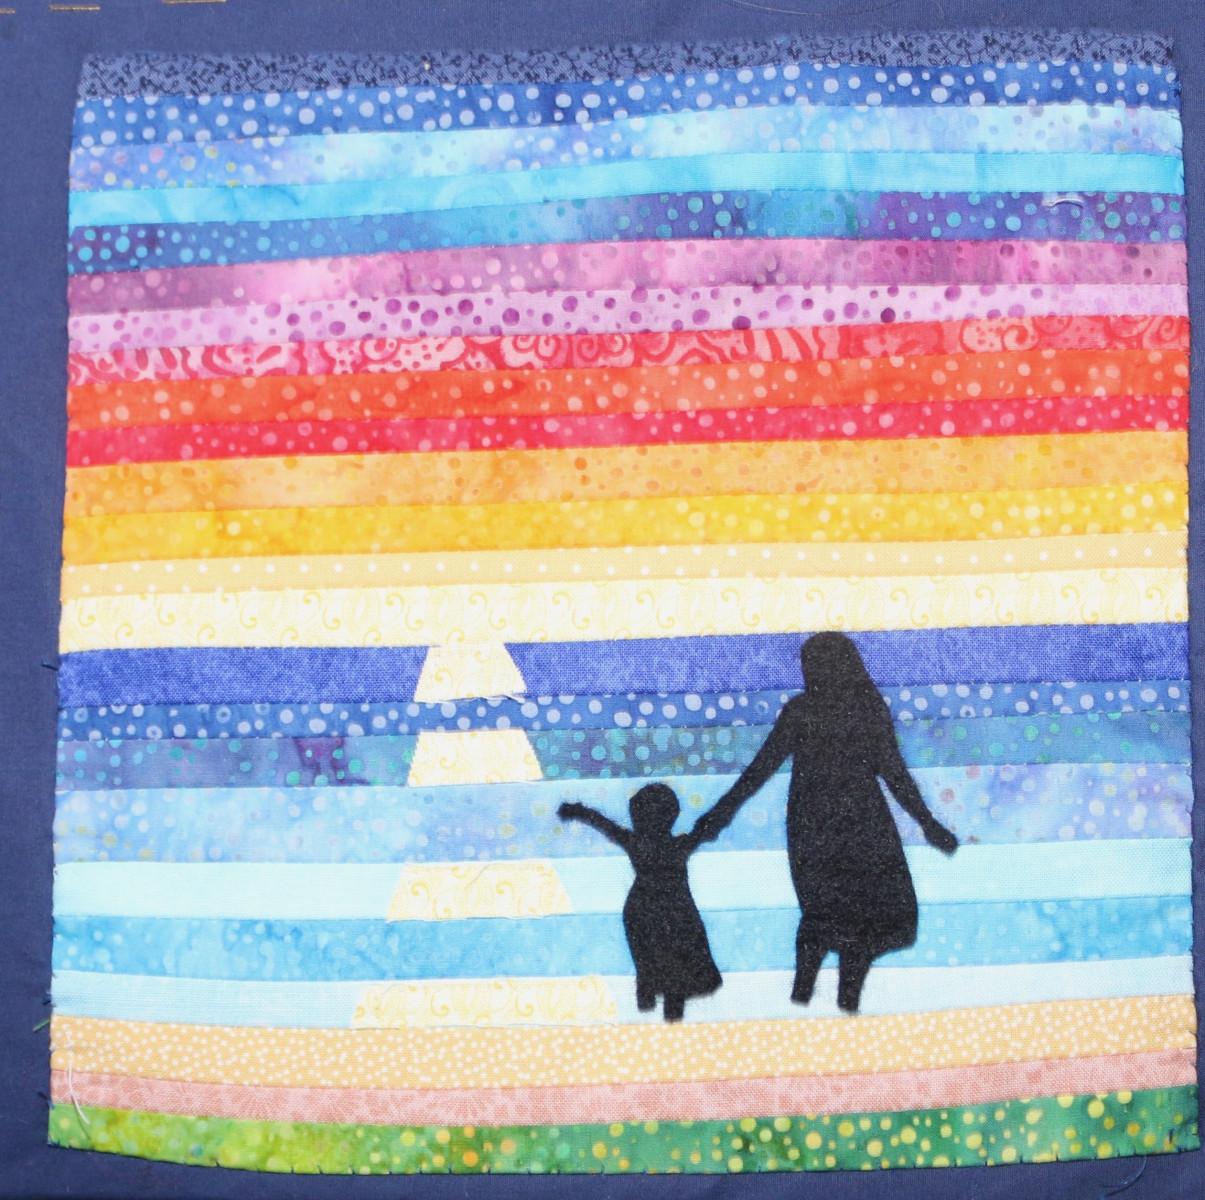 Two figures crossing a rainbow highway, hand-in-hand